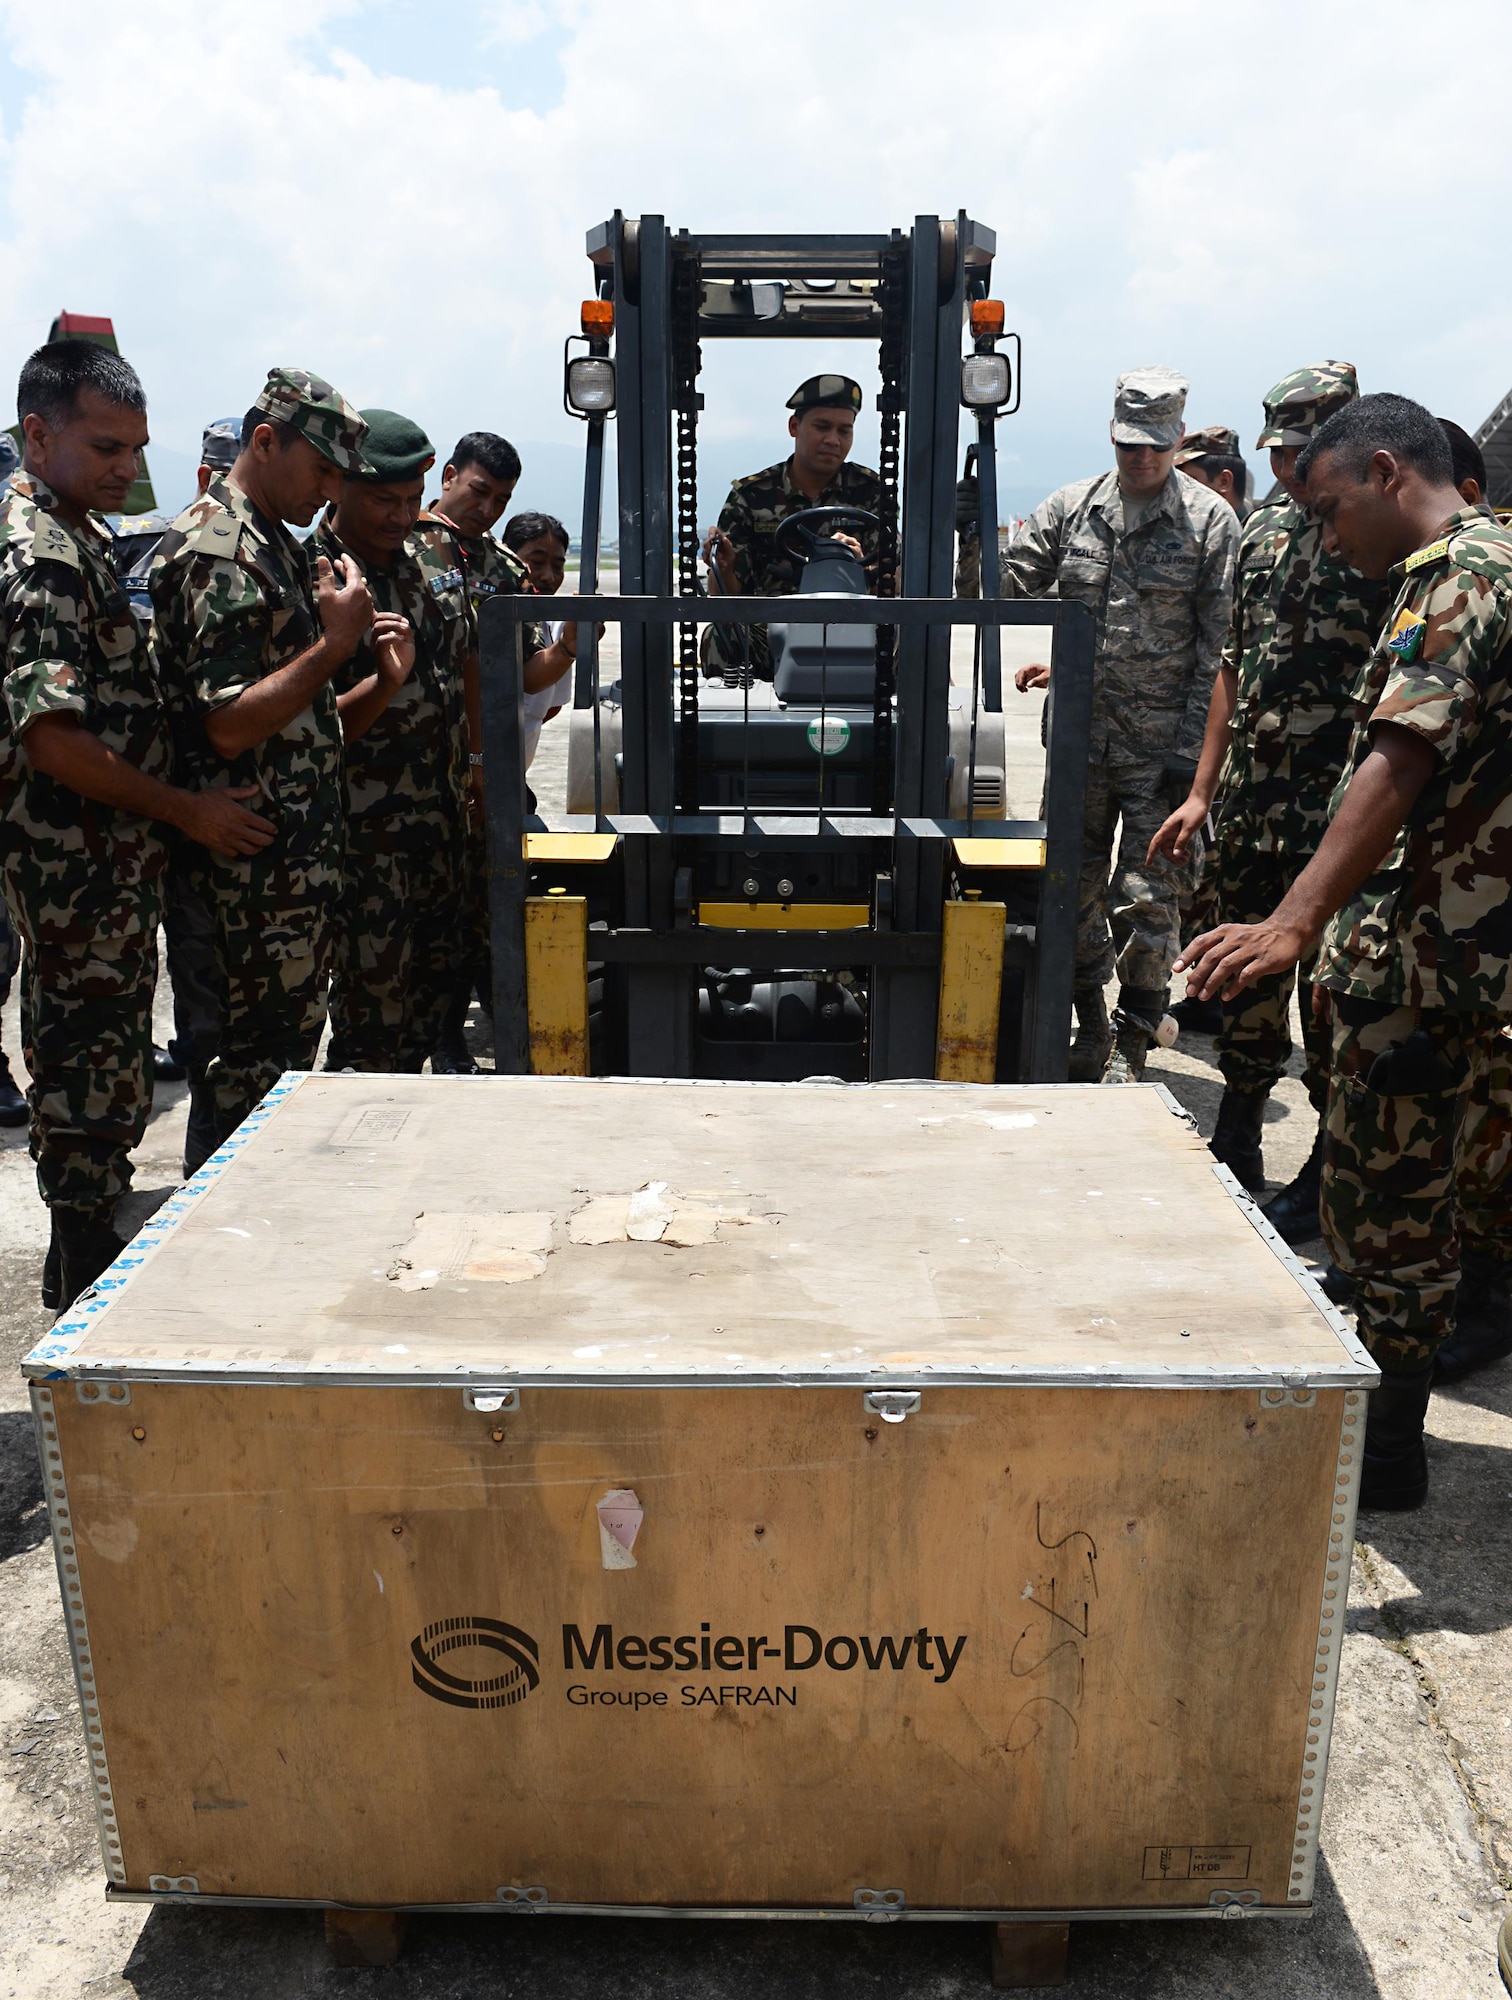 Tech. Sgt. Derrick McCall, 36th Contingency Response Group, demonstrates how to lift an object as a member of the Nepalese Army operates a forklift June 28, 2016, at Tribhuvan International Airport in Kathmandu, Nepal. Ten Airmen from the 36th CRG and more than 20 service members from various Nepalese organizations participated in a subject-matter expert exchange where participants familiarized themselves with operating a forklift and learned techniques on transporting cargo. (U.S. Air Force photo by Staff Sgt. Benjamin Gonsier/Released)